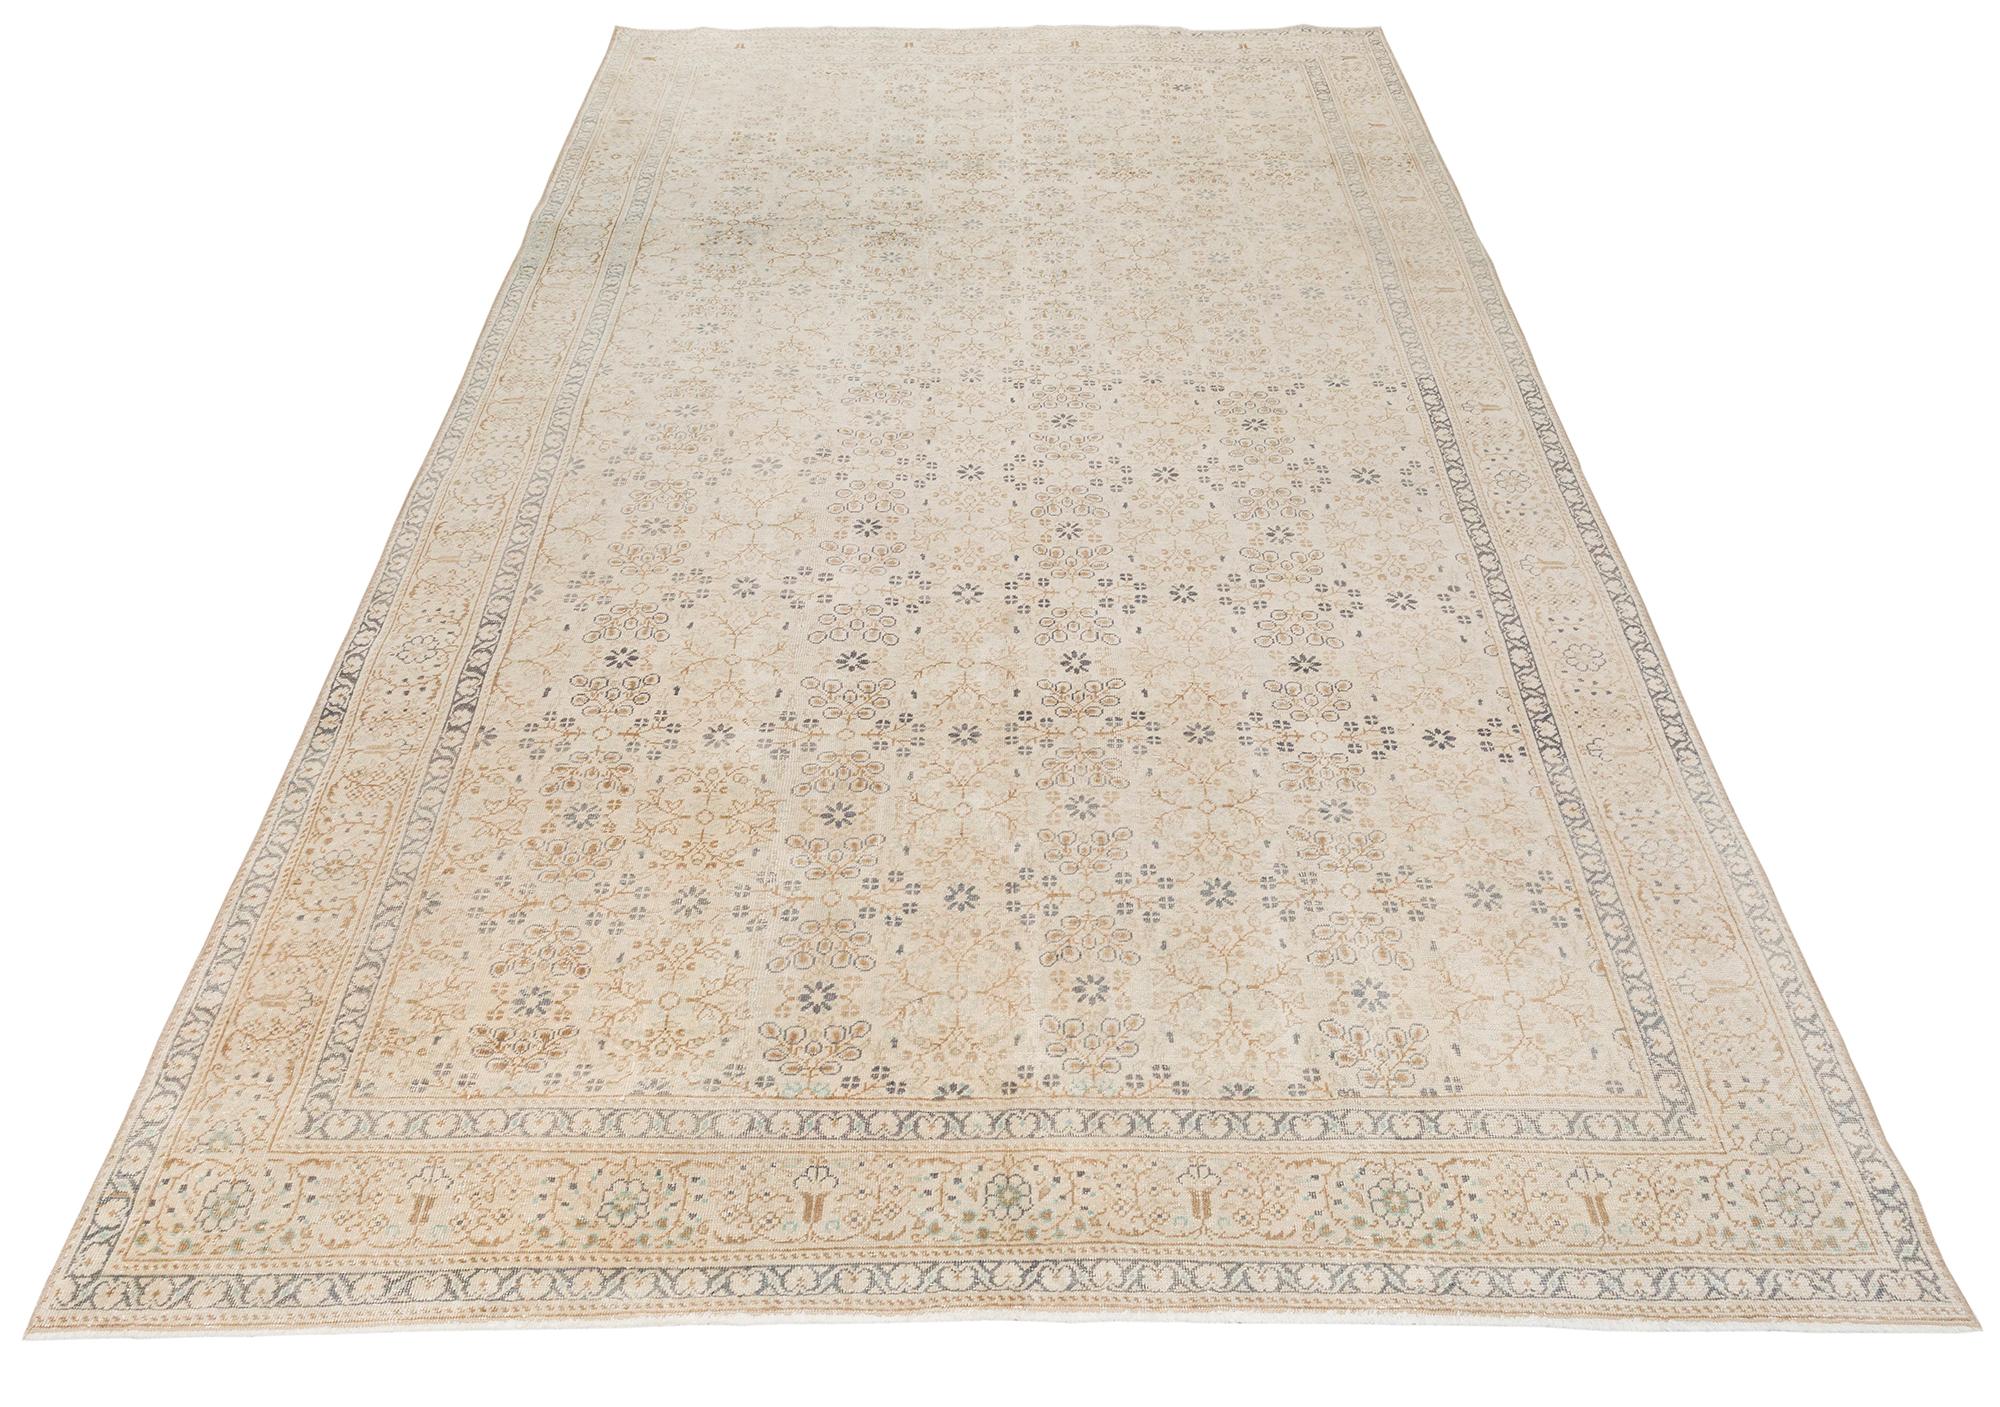 This Turkish Sivas rug originated from the city of Sivas in central Anatolia. The city has a rich history of carpet making that dates back centuries.  These rugs are characterized by their soft palettes and Persian-style idioms of medallions and